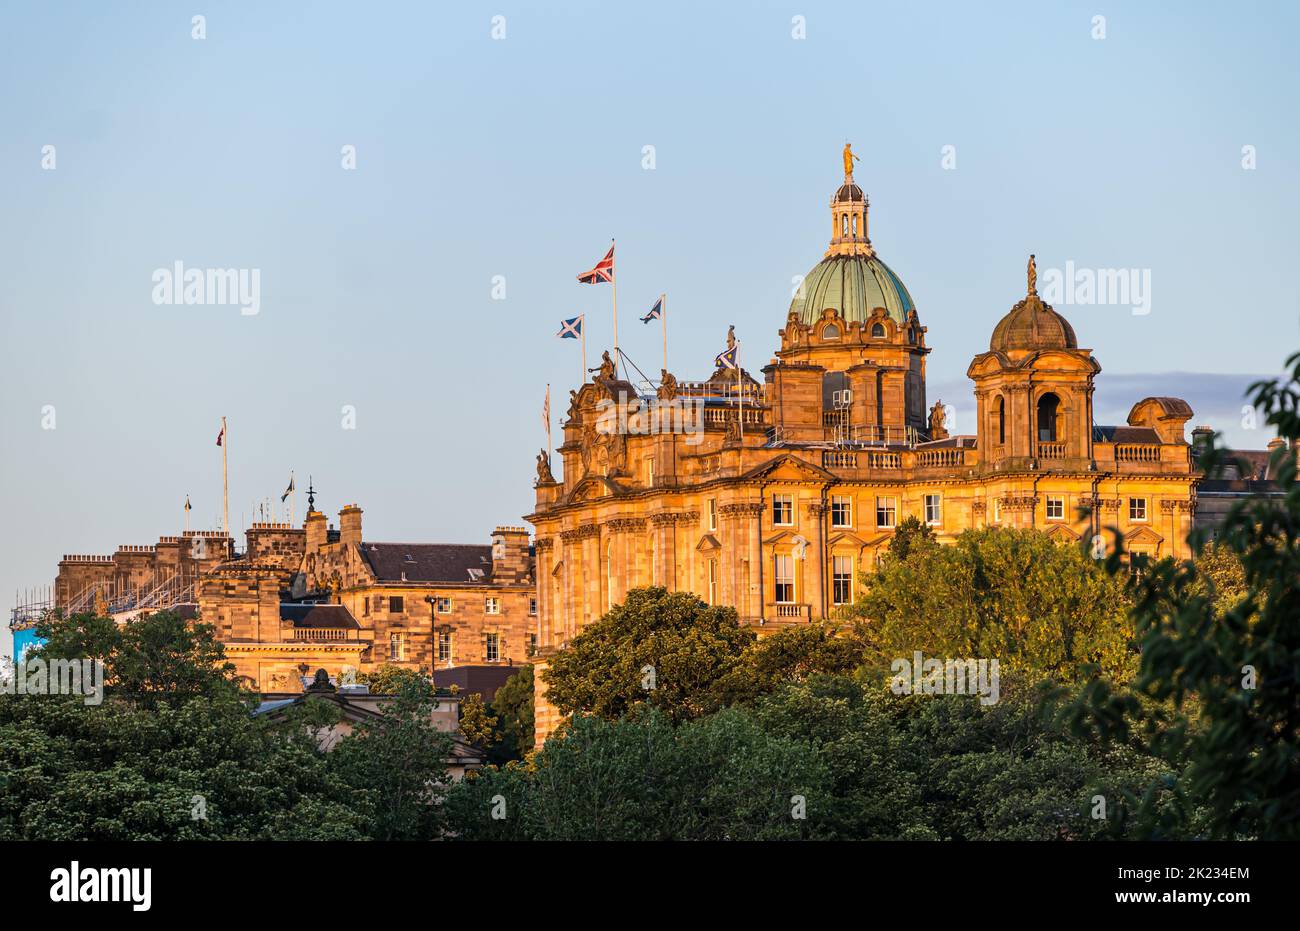 Grand building with copper dome former Bank of Scotland headquarters  flying saltire and Union Jack national flags, Edinburgh, Scotland, UK Stock Photo